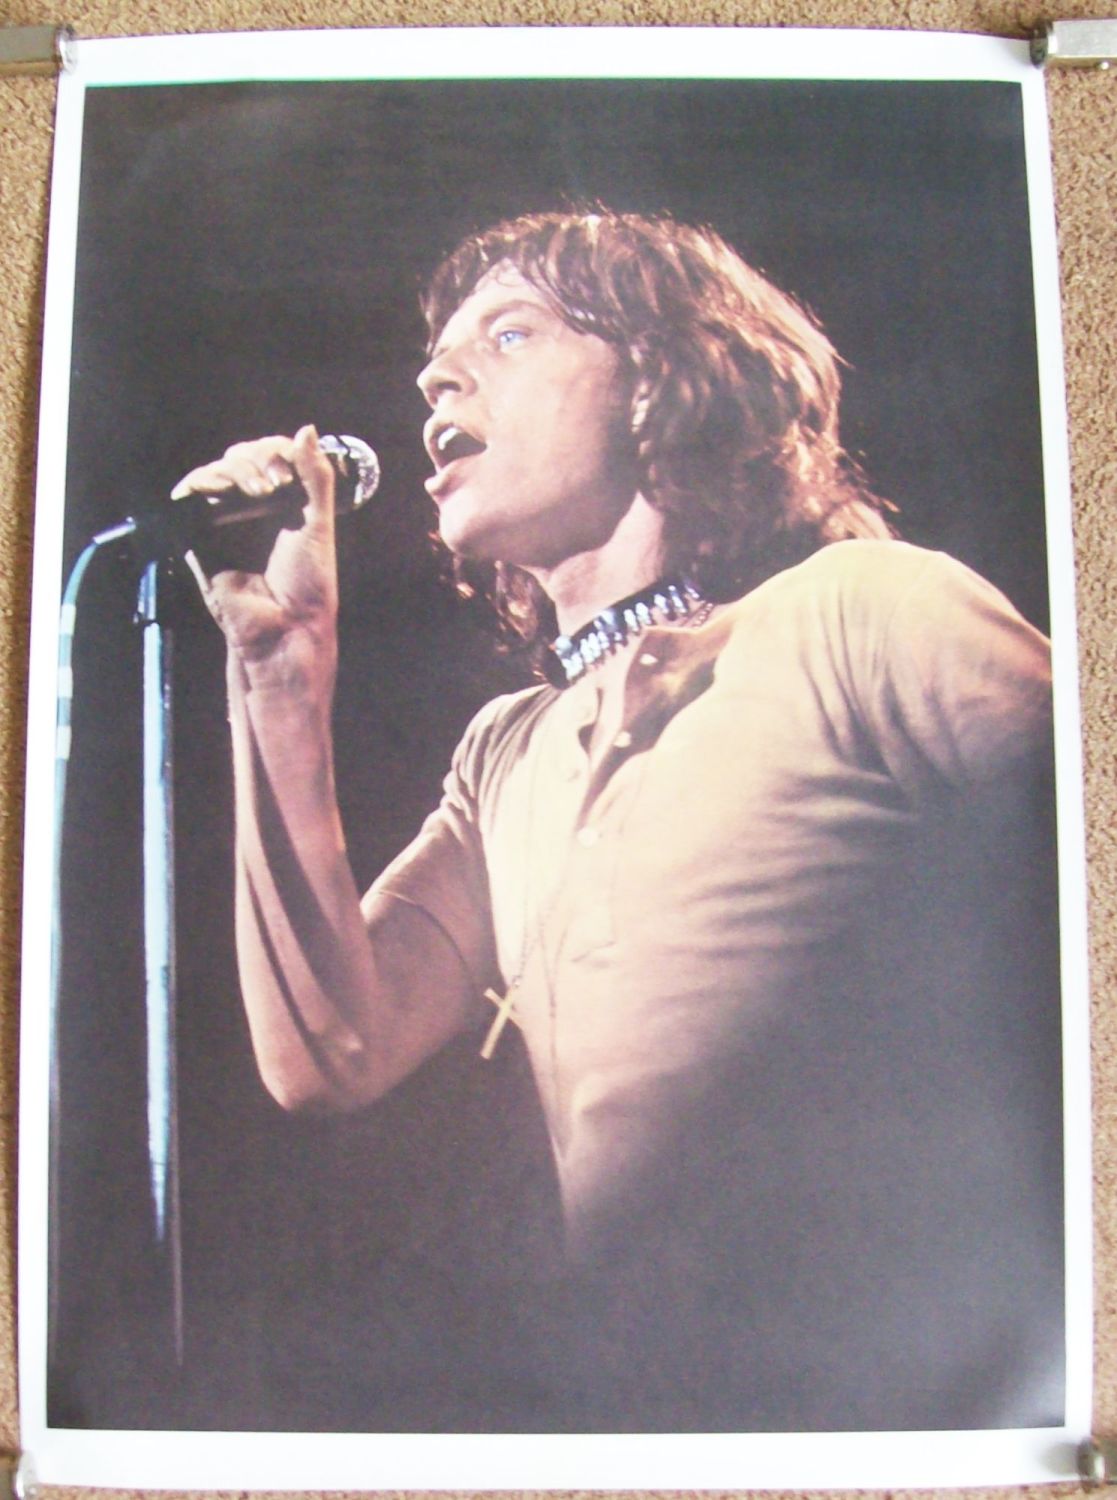 THE ROLLING STONES MICK JAGGER SUPERB 1972 U.K. LIVE ON STAGE PERSONALITY P